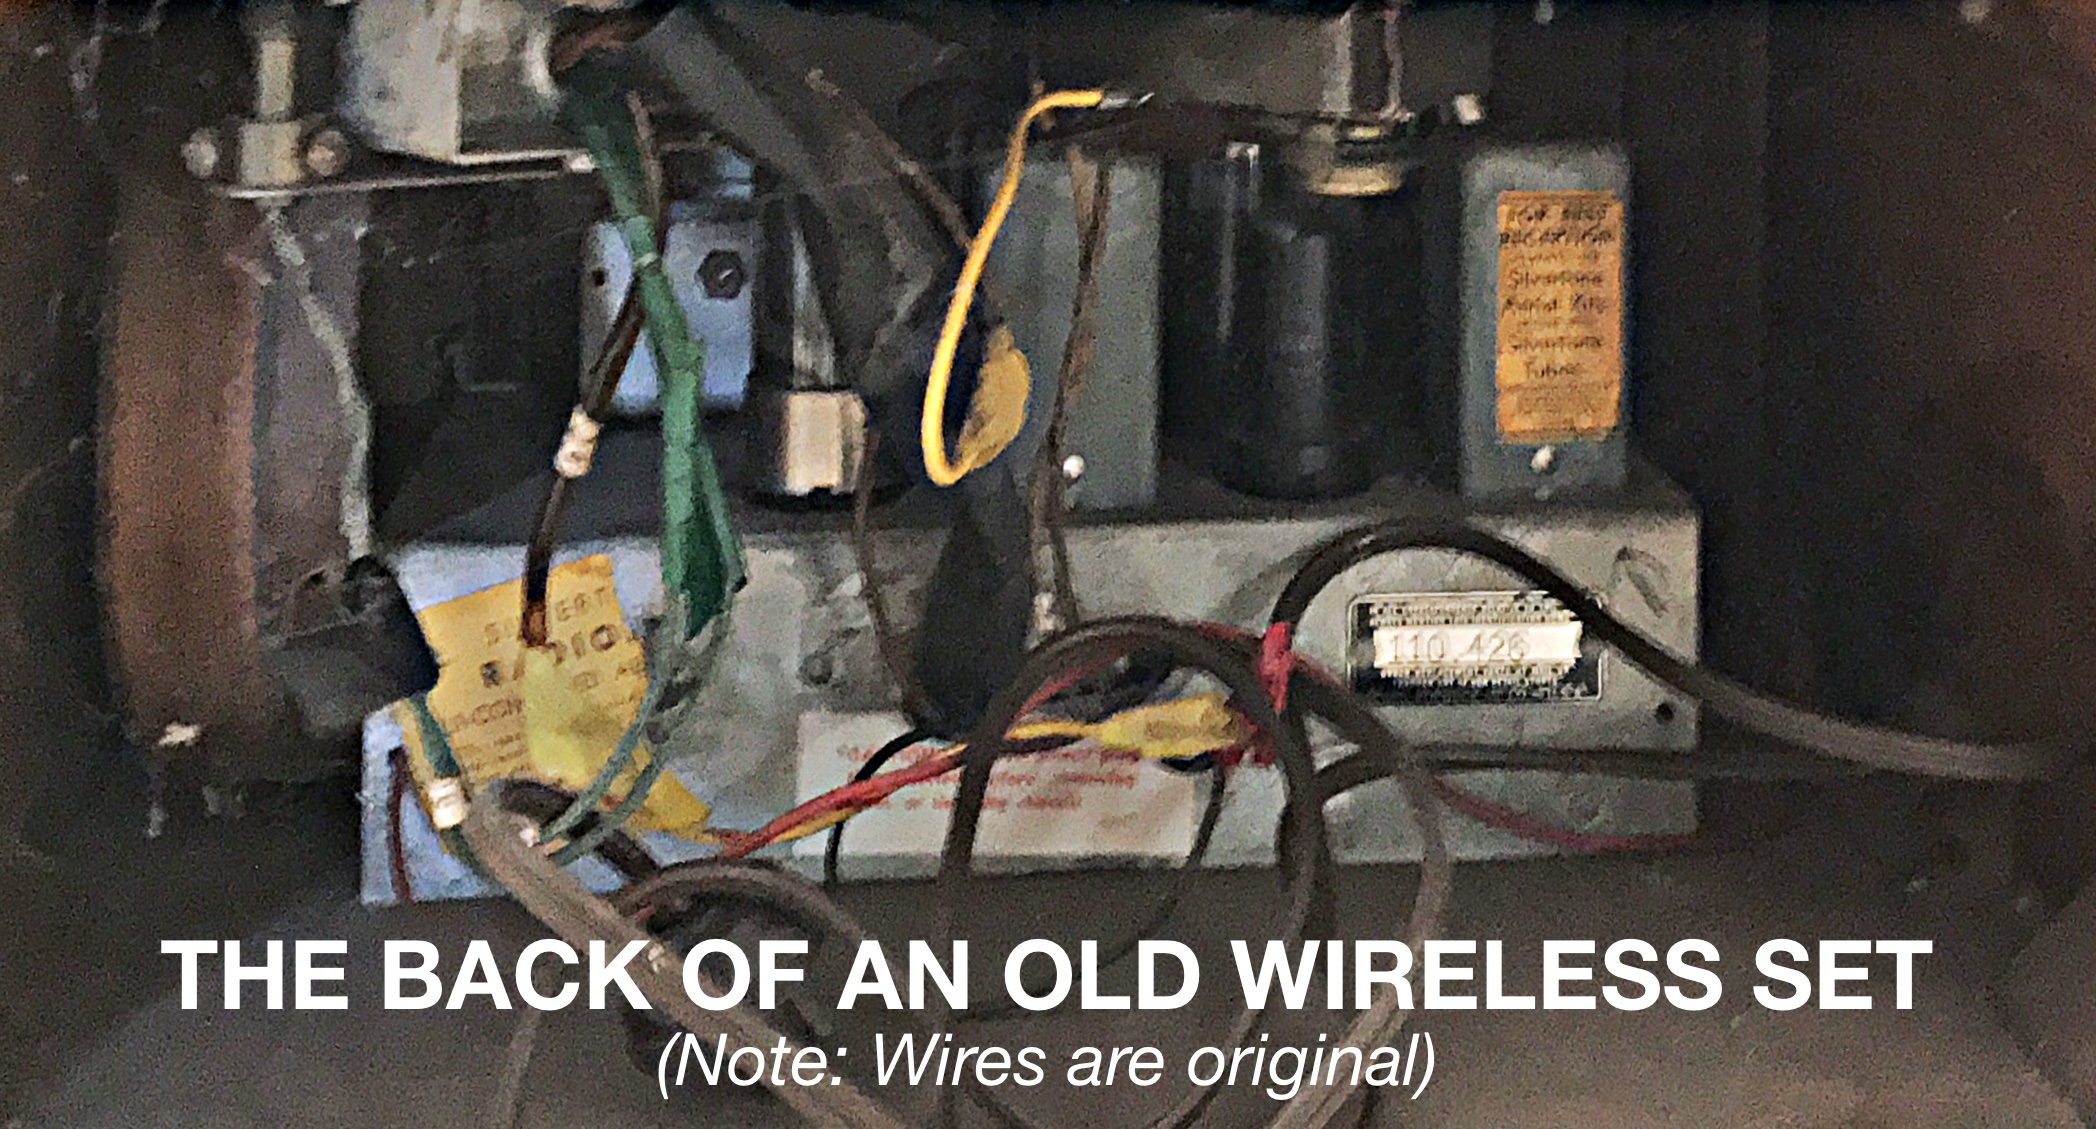 See, no wires to speak of!